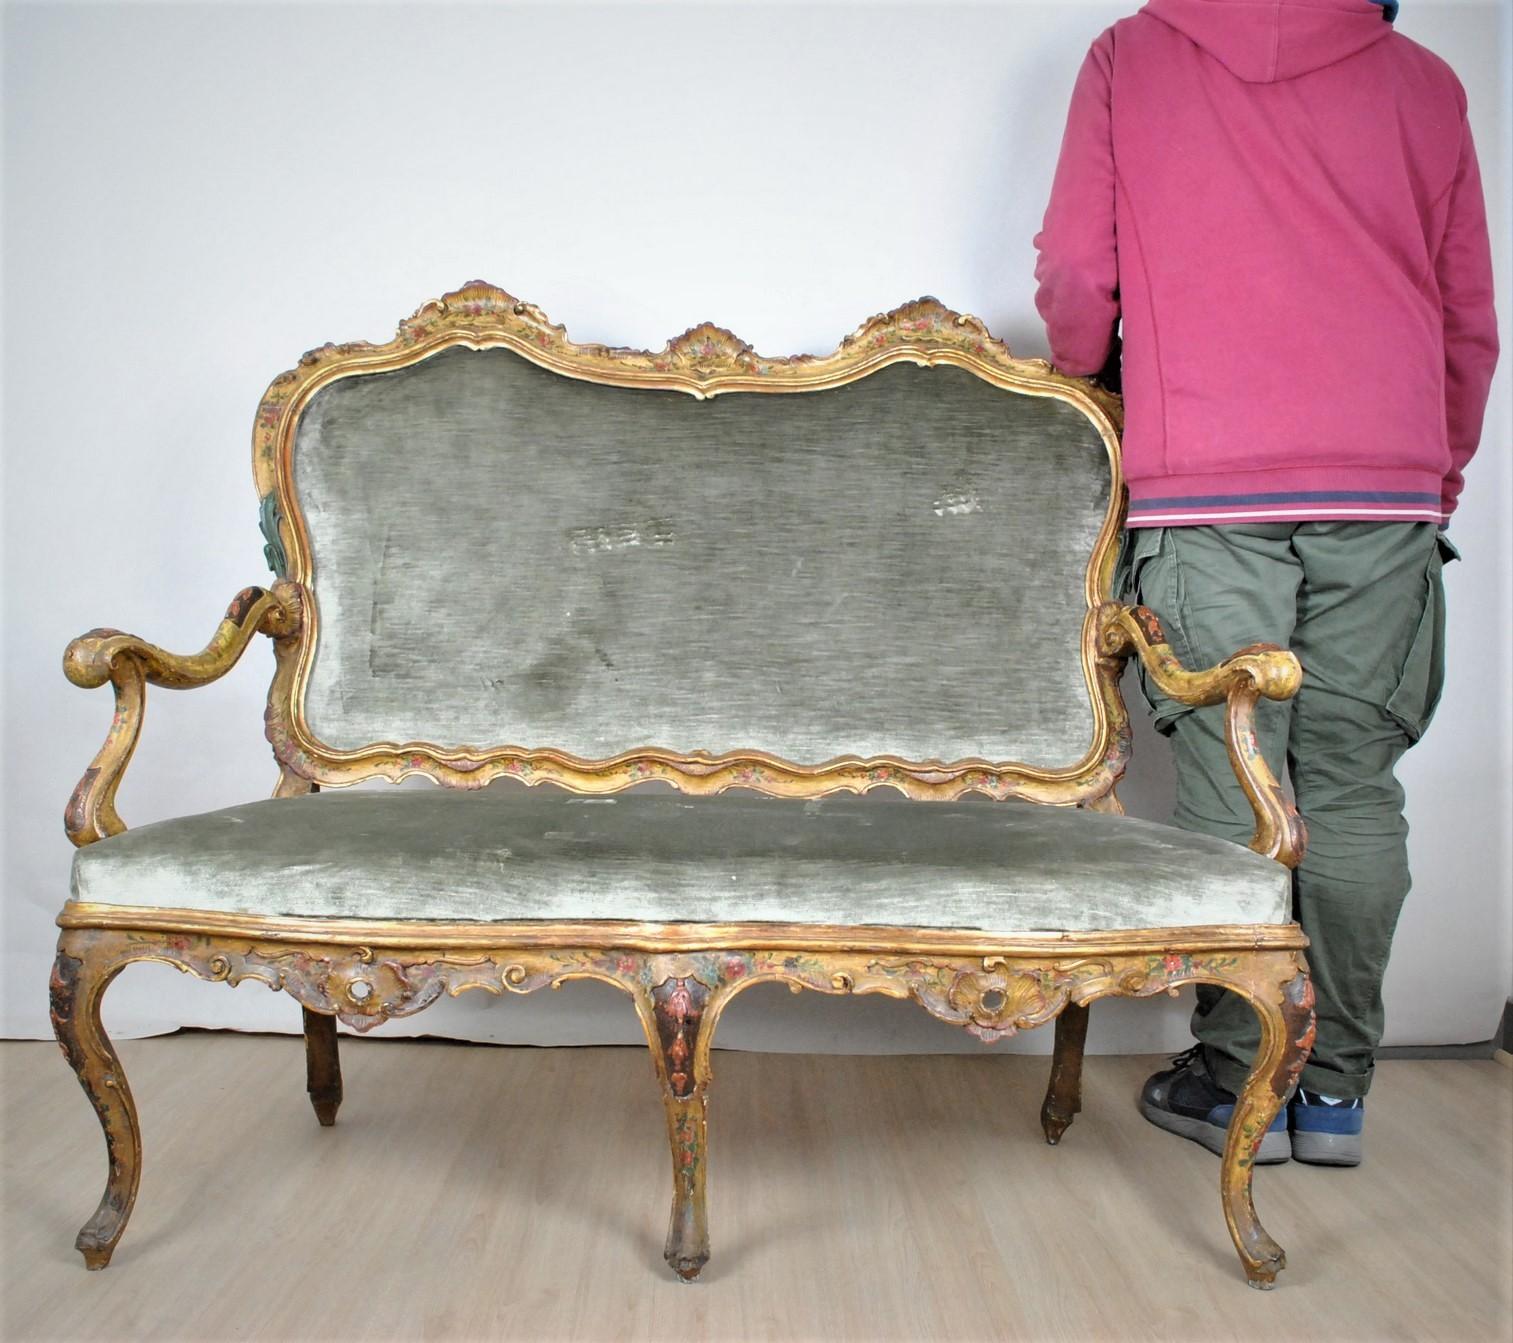 Bench in lacquered and gilded wood, decoration of flowers and foliage on a yellow/sand background.

The backrest with frame and the seat are removable: they are covered with a short velvet in green/khaki tones (clean but marked)

Good condition